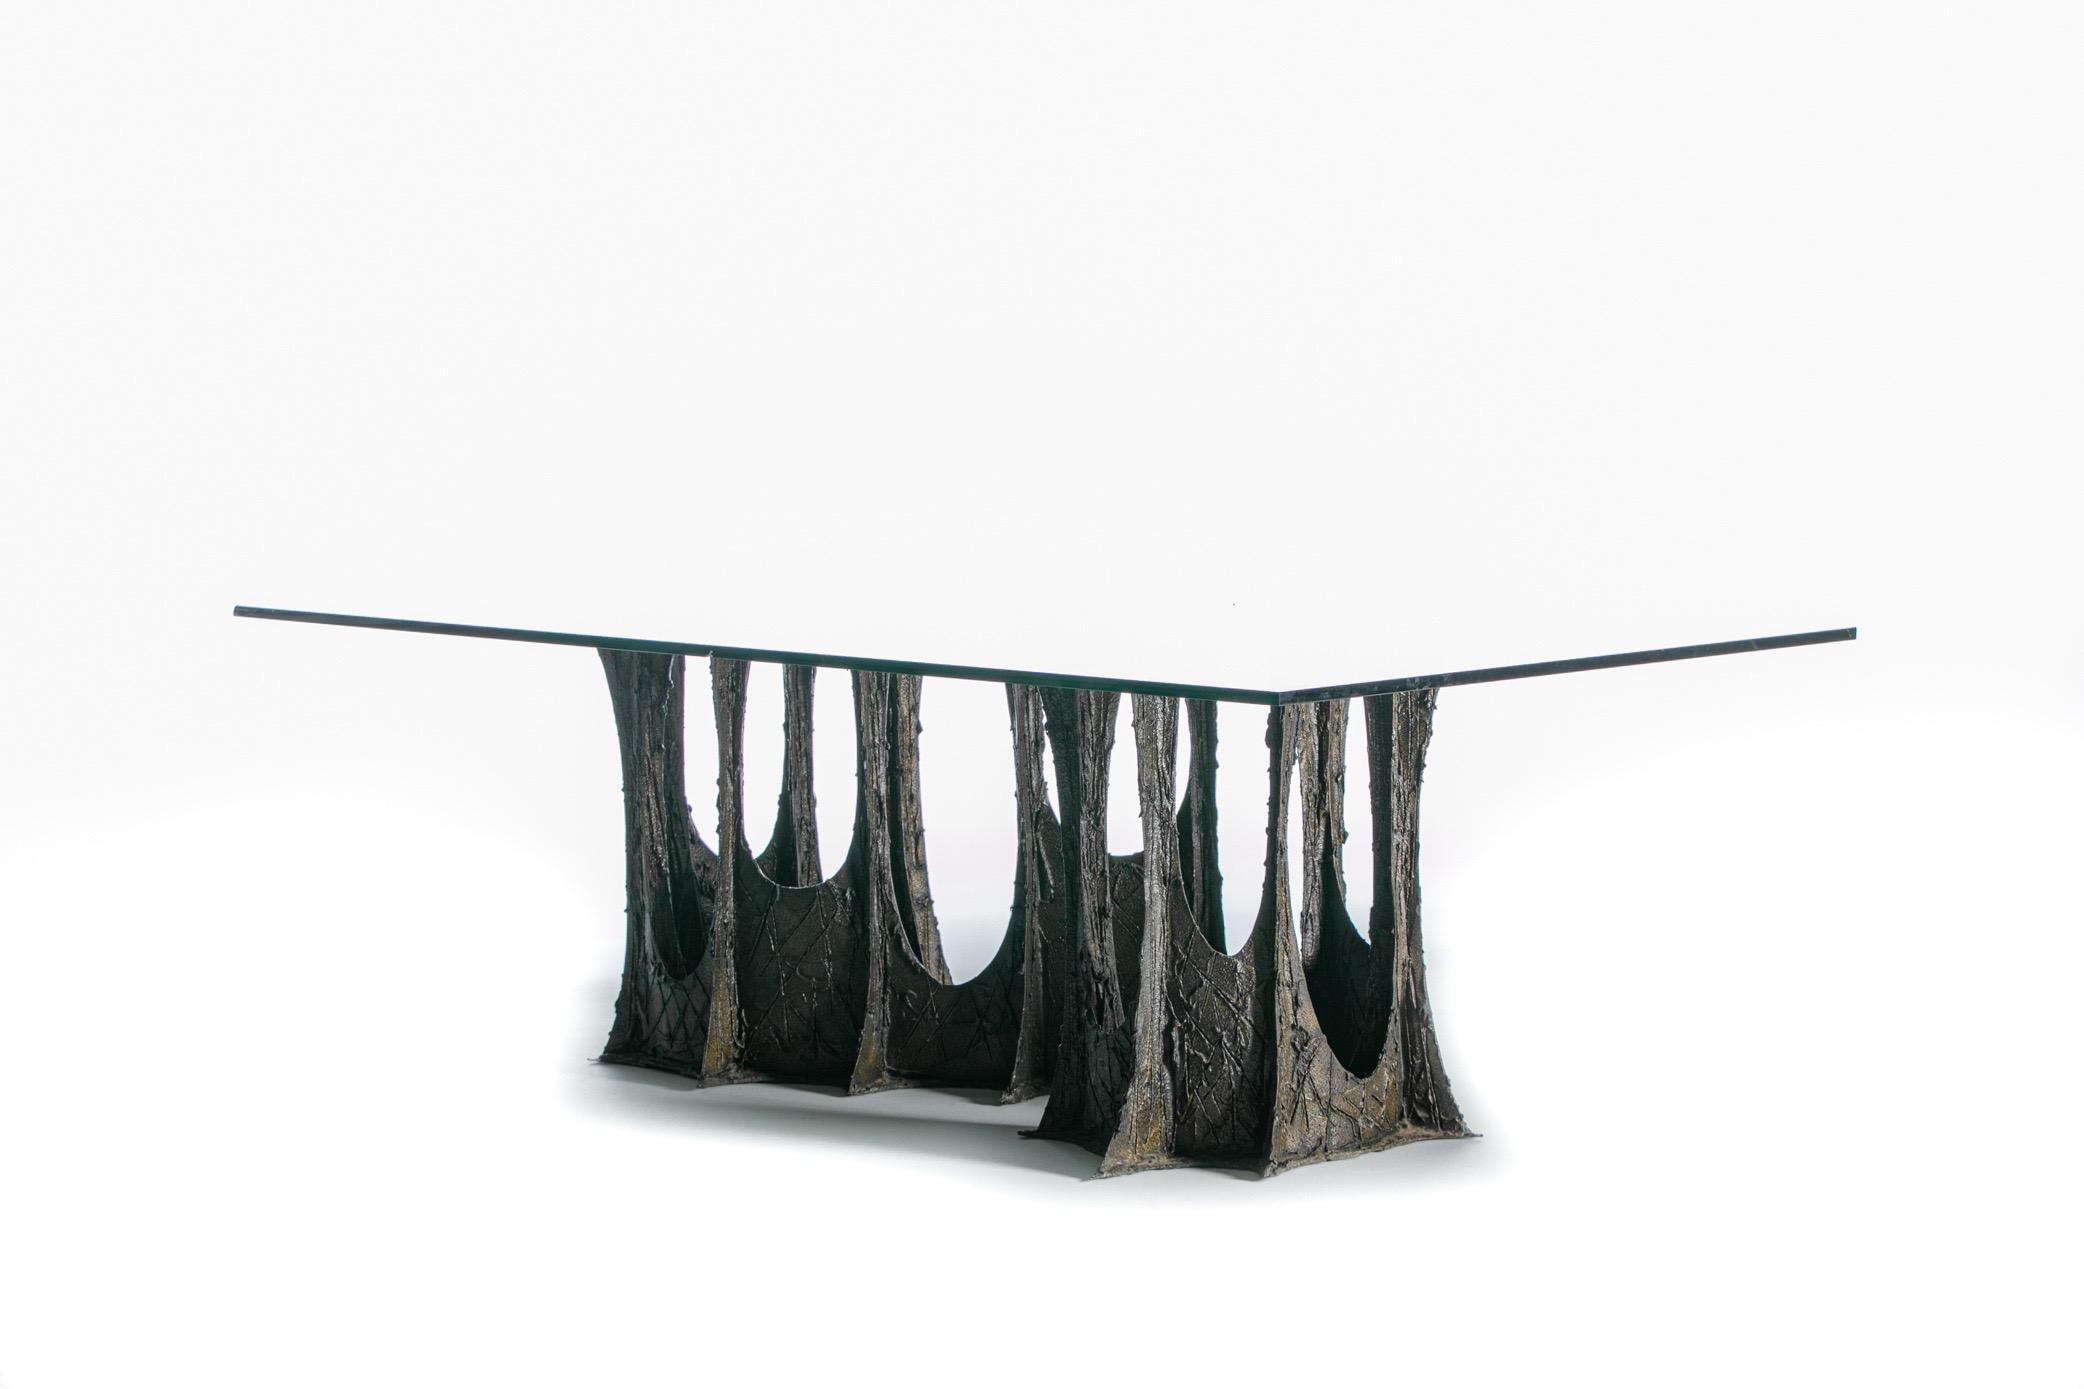 Late 20th Century Signed Paul Evans Brutalist Dining Table Sculpted of Bronze, circa 1974